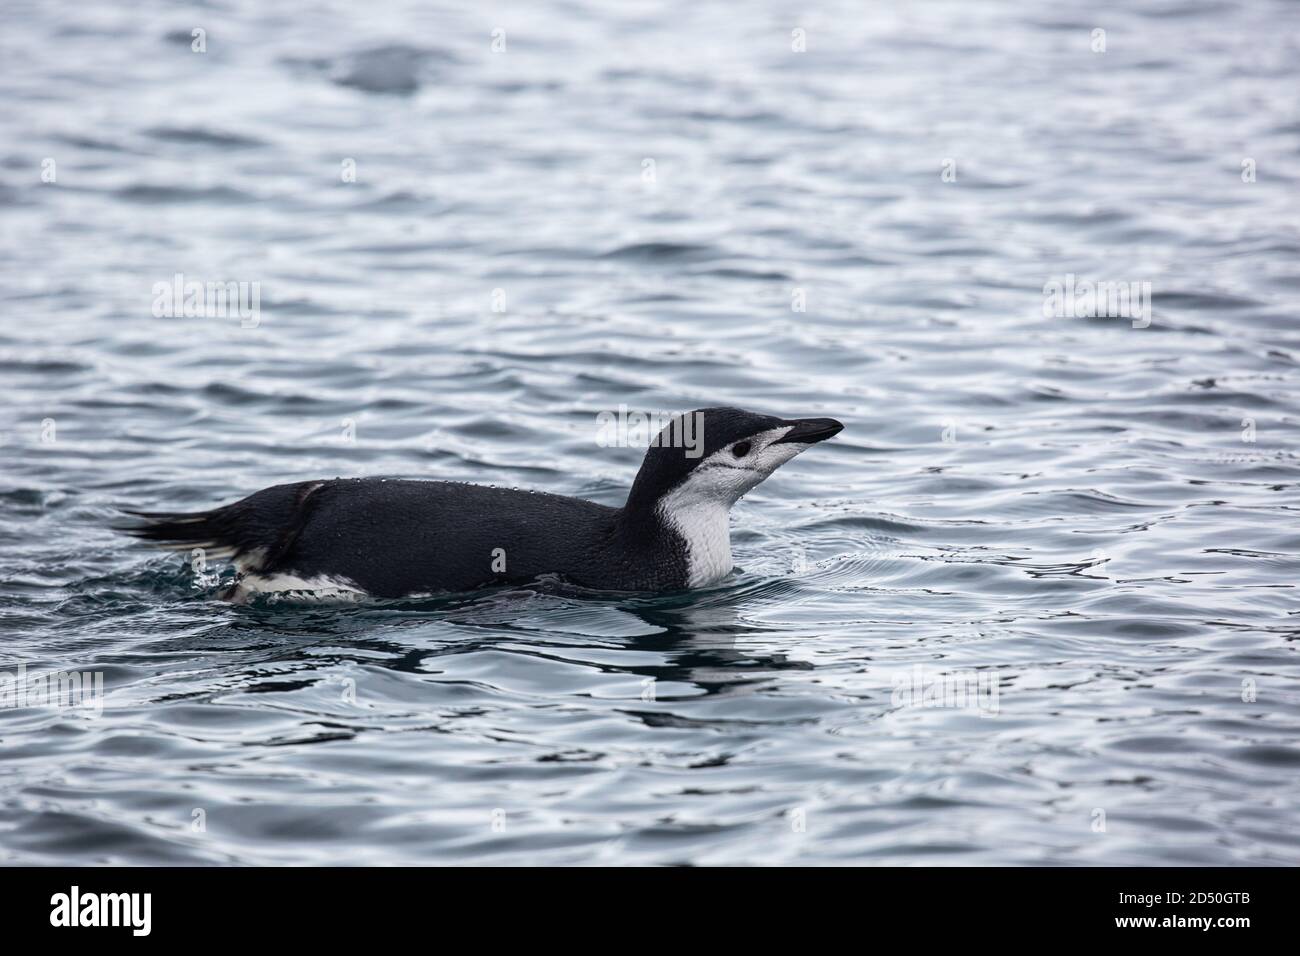 Chinstrap penguins (Pygoscelis antarctica). These birds feed almost exclusively on krill. They inhabit the Antarctic and Antarctic islands. They migra Stock Photo